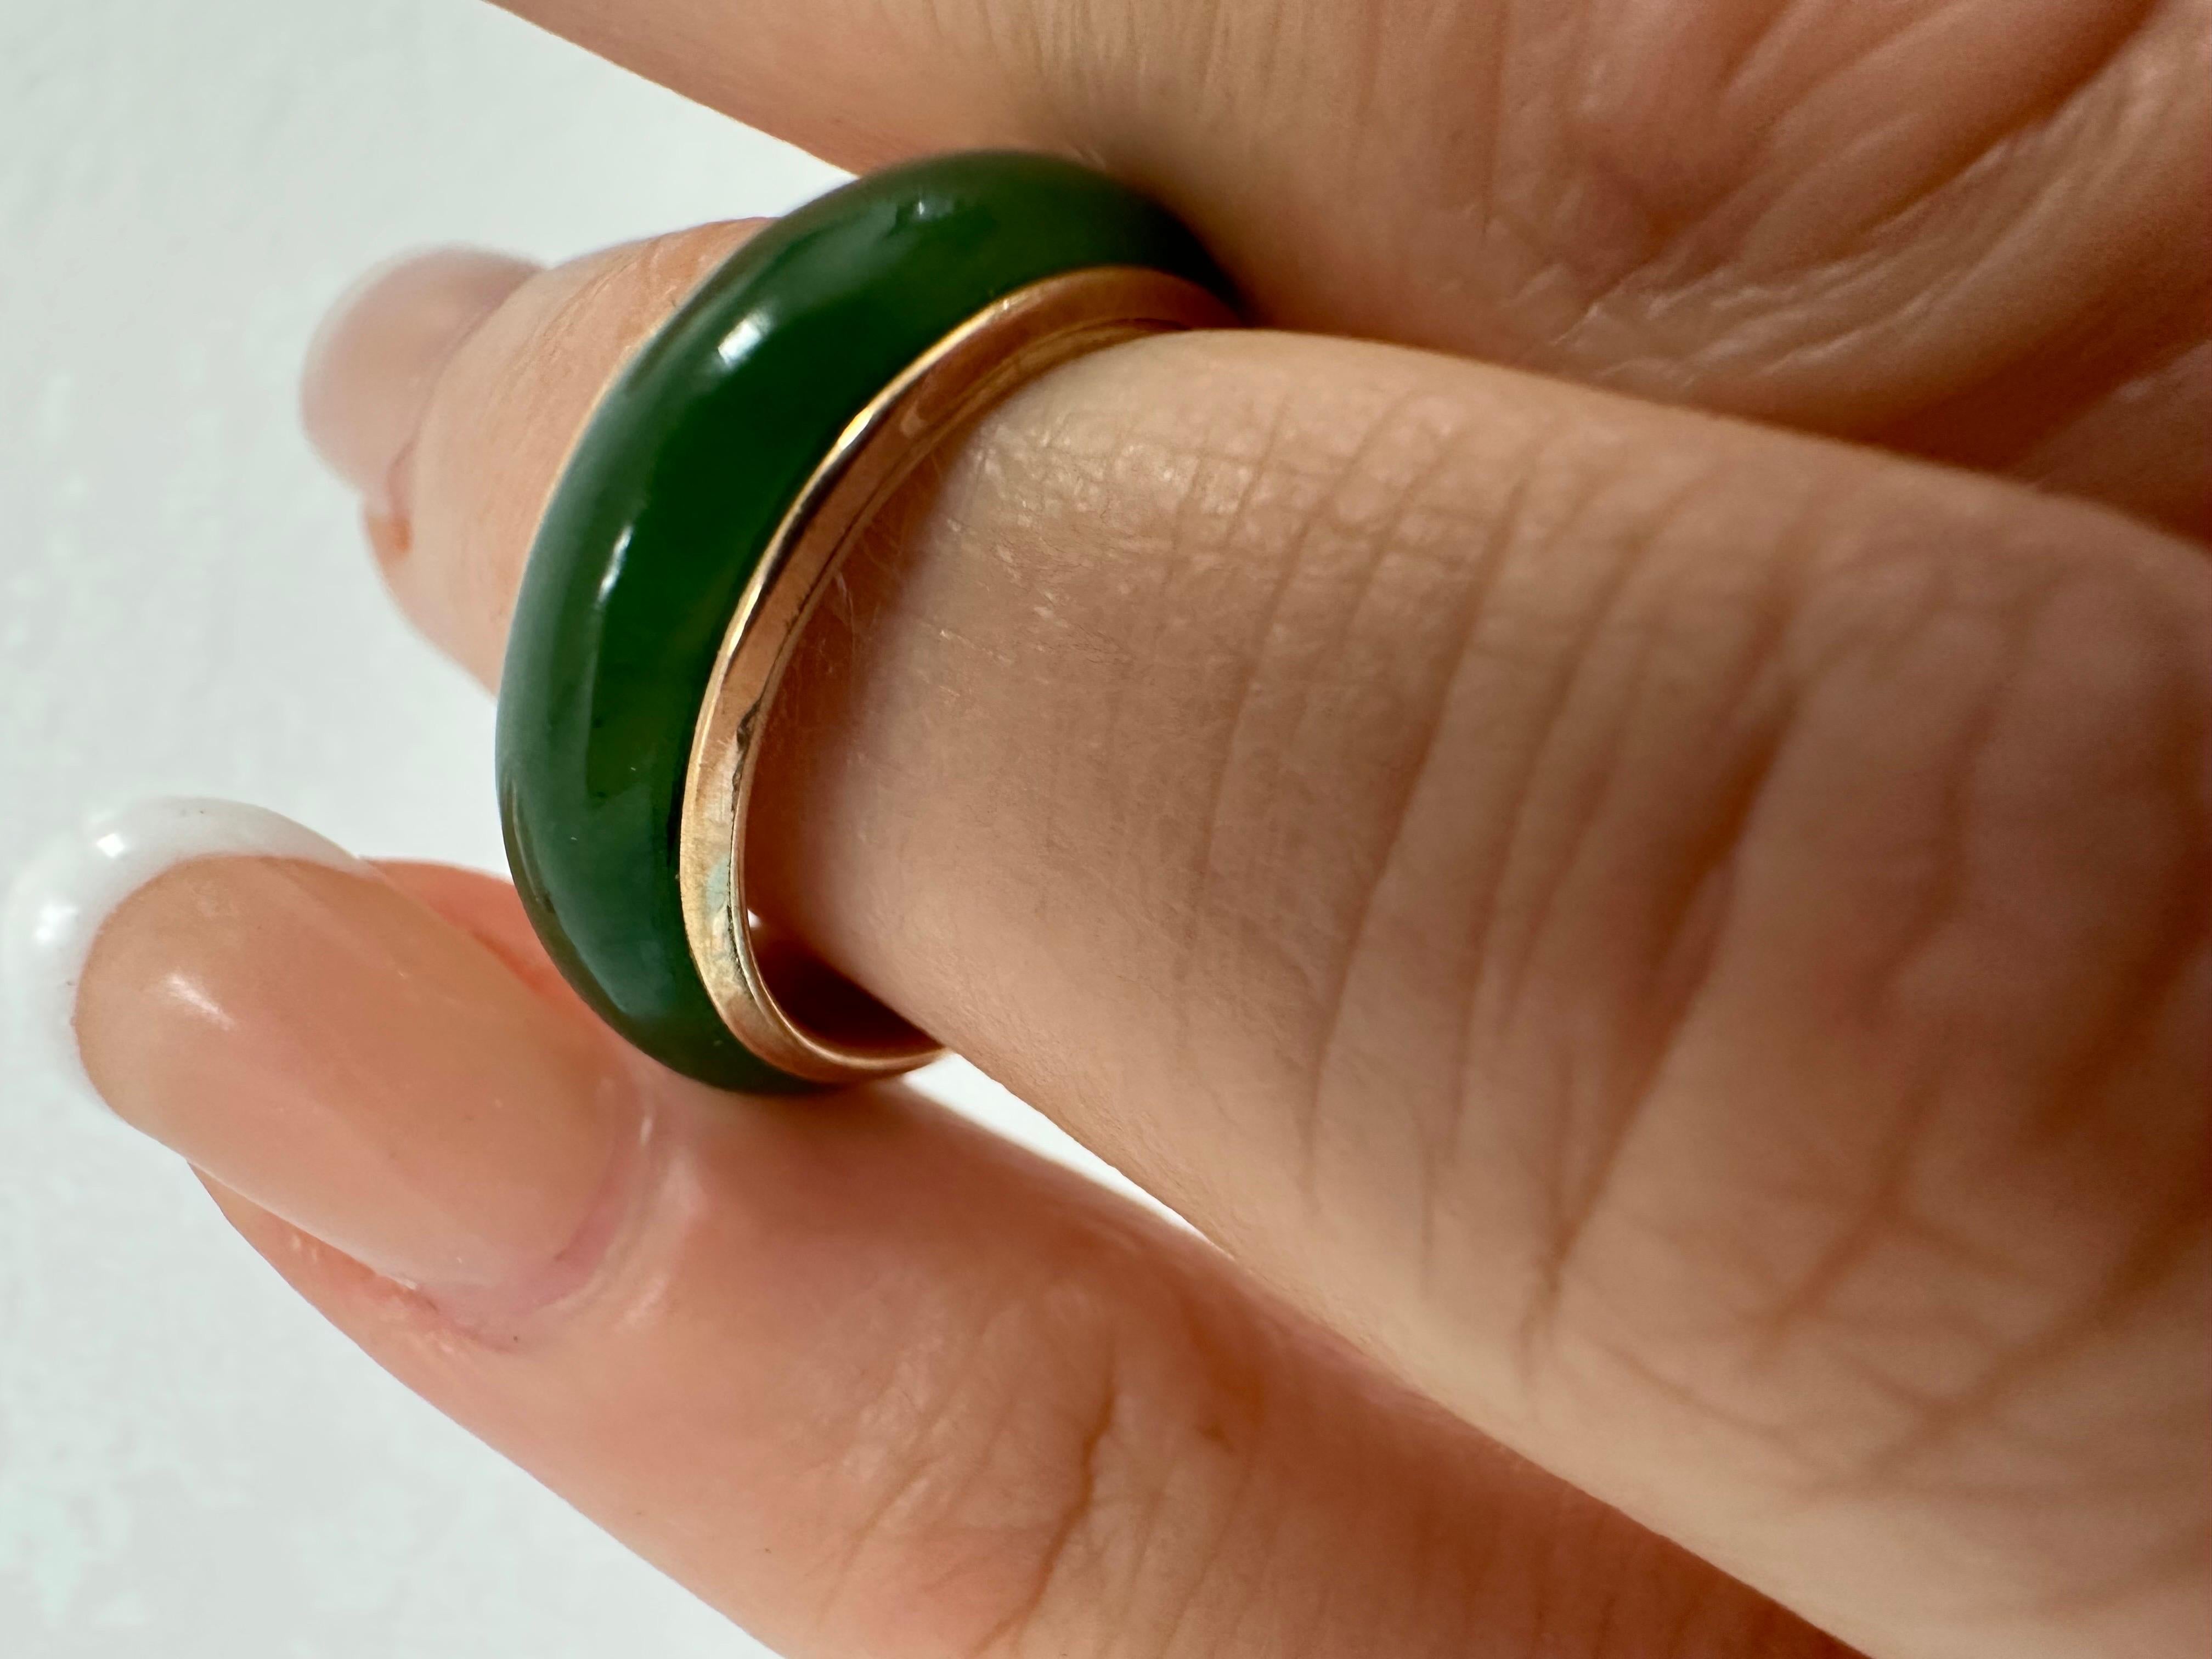 Jade eternity ring in size 5 , 100% natural jade, ring weighs 3.3 grams and cannot be sized.


Certificate of authenticity comes with purchase

ABOUT US
We are a family-owned business. Our studio in located in the heart of Boca Raton at the